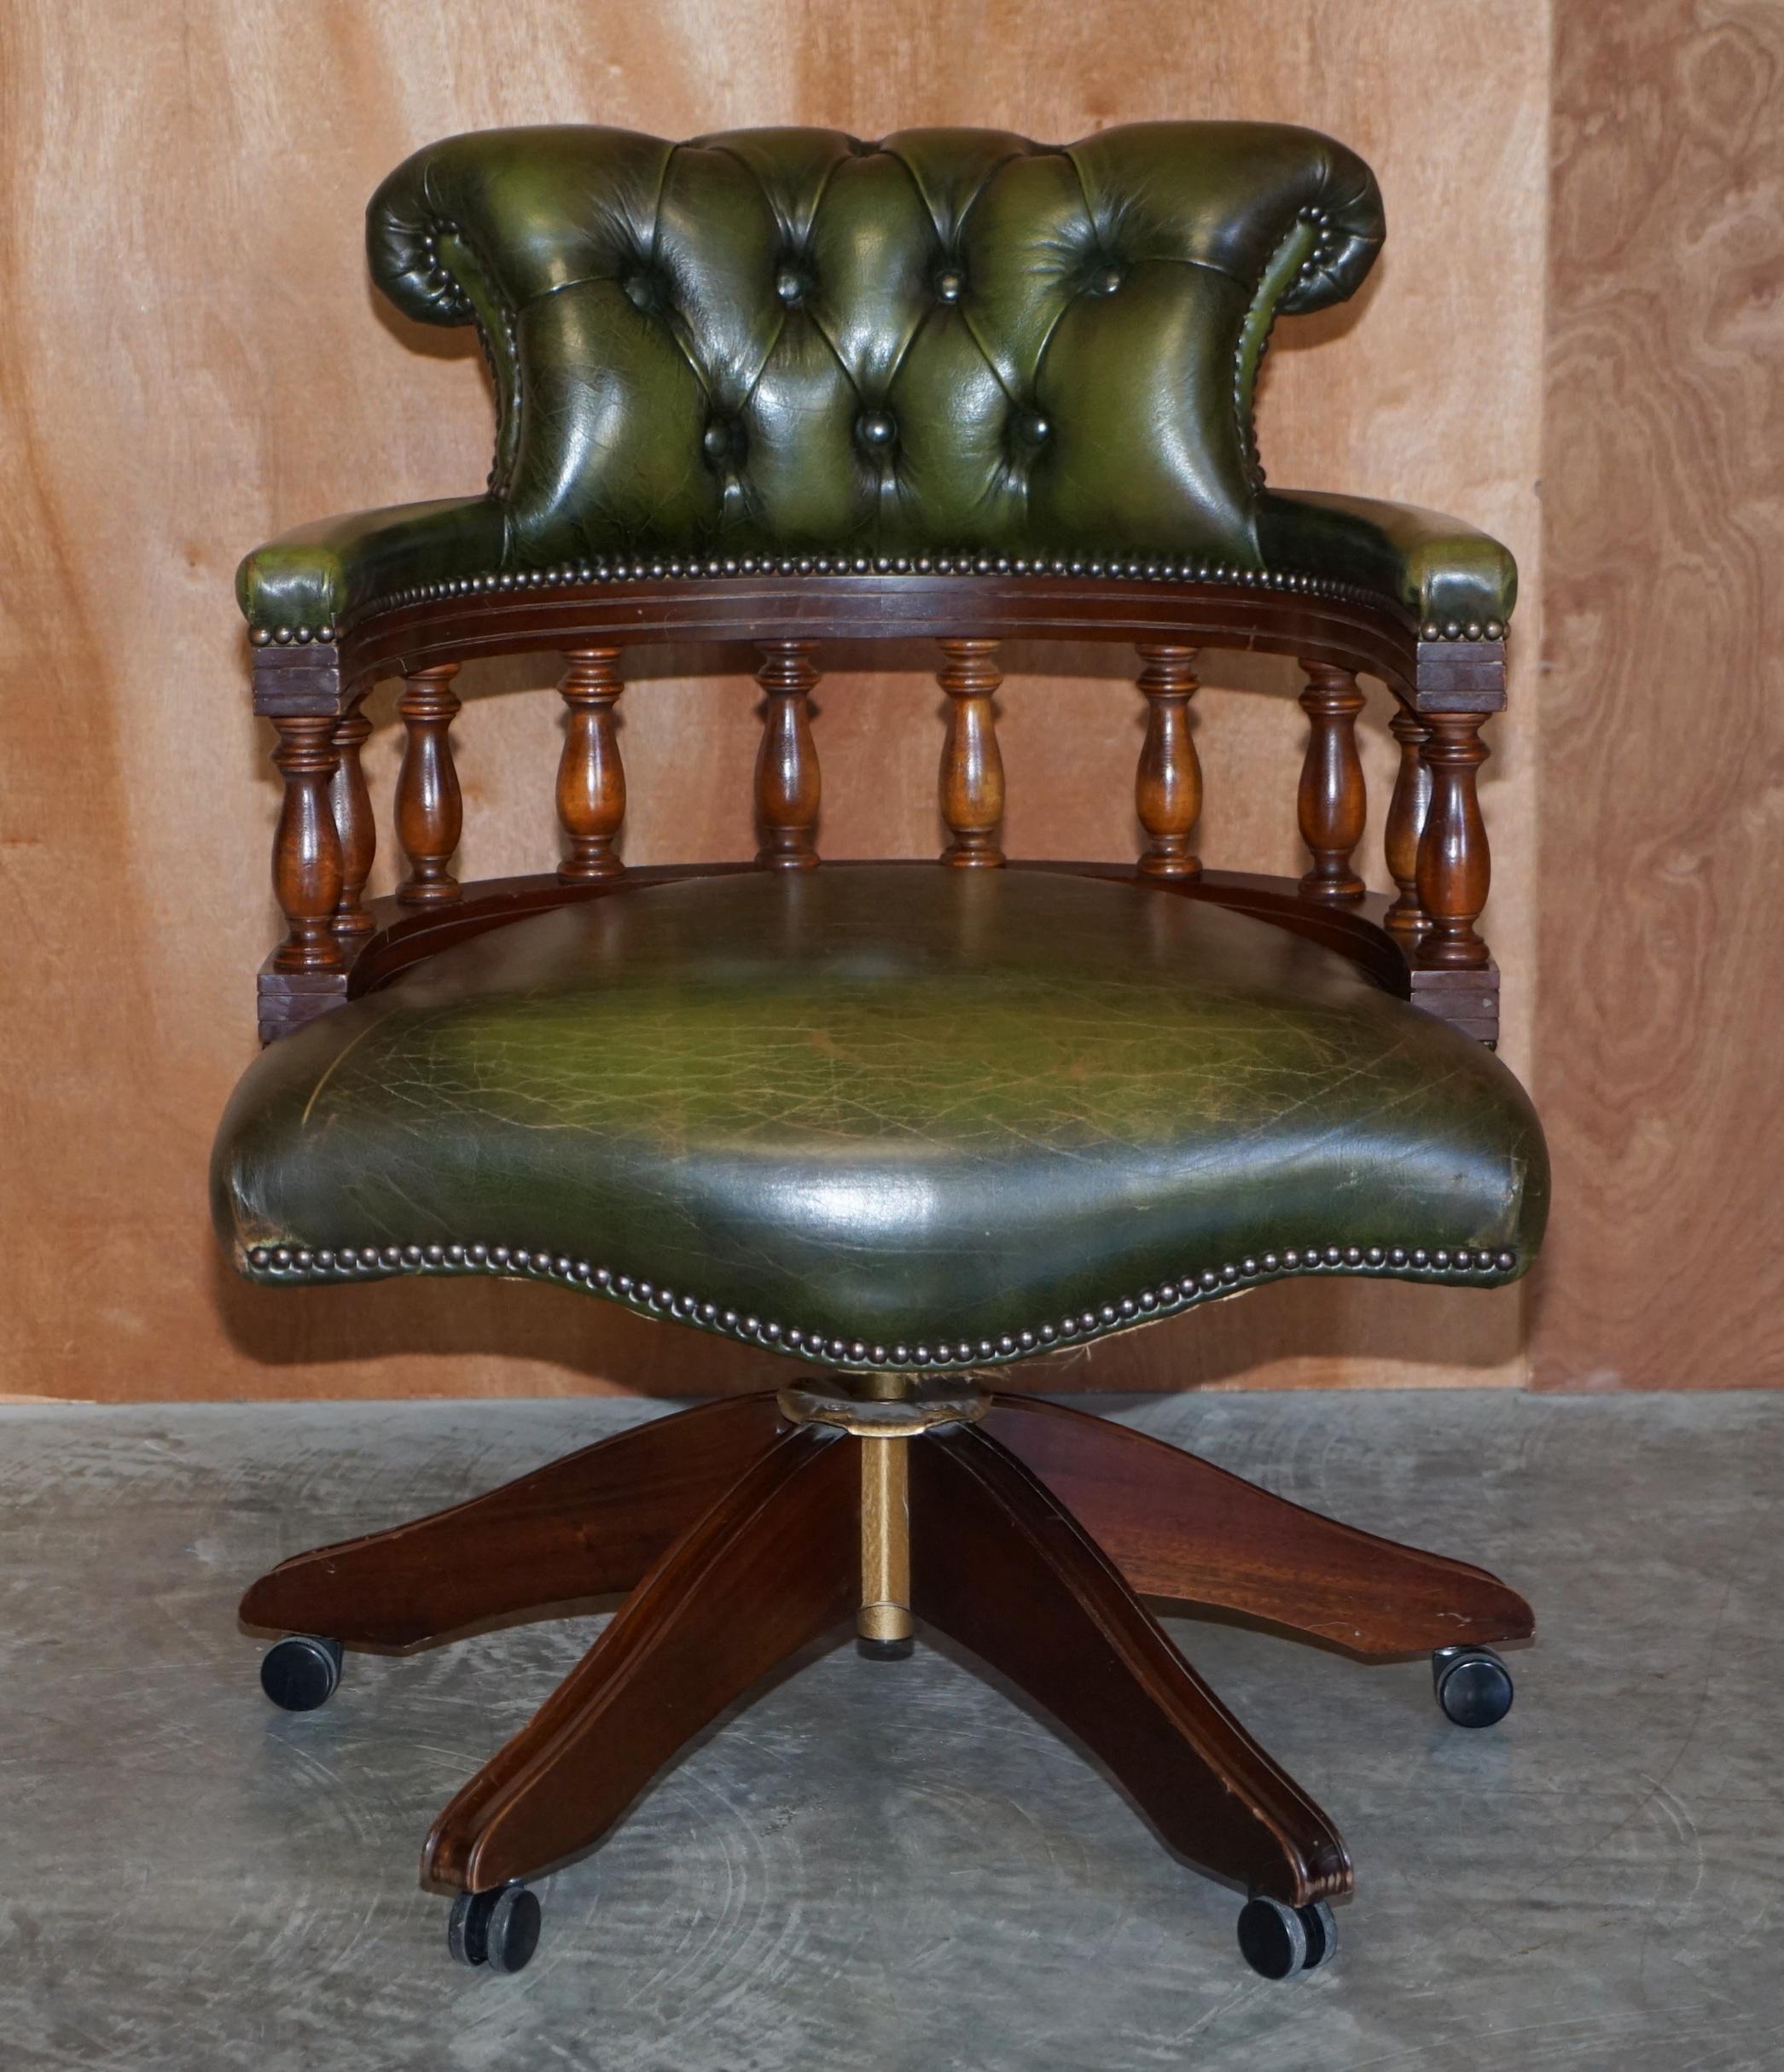 We are delighted to offer for sale this lovely handmade Chesterfield buttoned green leather Captains or Director's armchair.

Please note the delivery fee listed is just a guide, it covers within the M25 only for the UK and local Europe only for